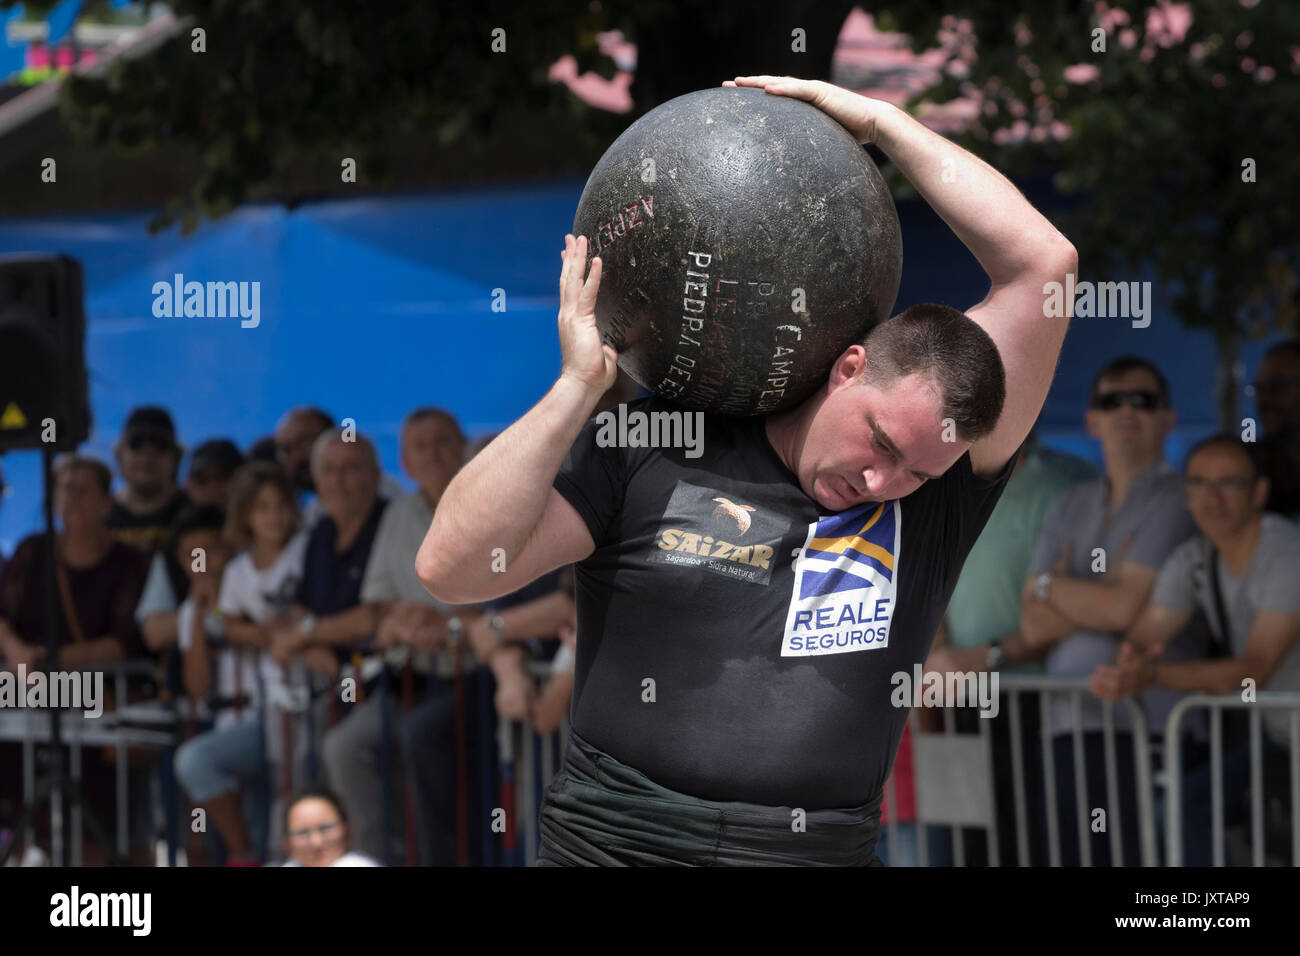 Basque stone lifter with a huge round stone in a competition. Stock Photo